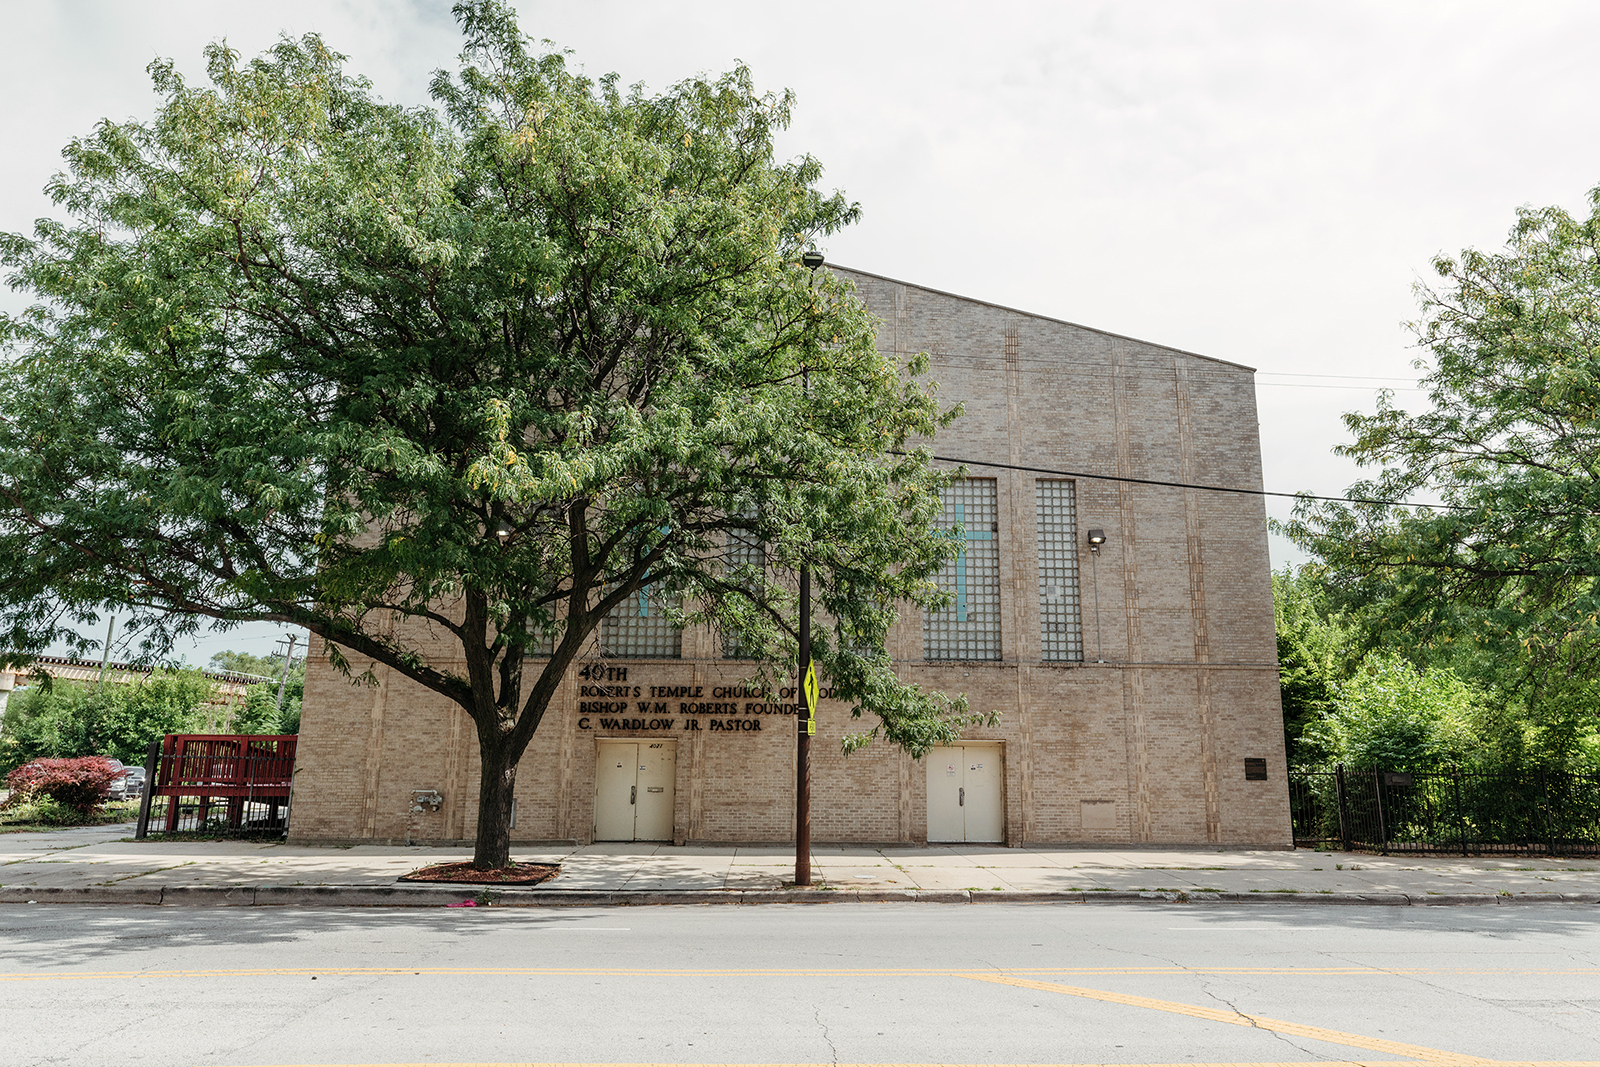 Roberts Temple Church of God in Christ in the Bronzeville neighborhood in Chicago. Photo by Battiest Photography/National Trust for Historic Preservation